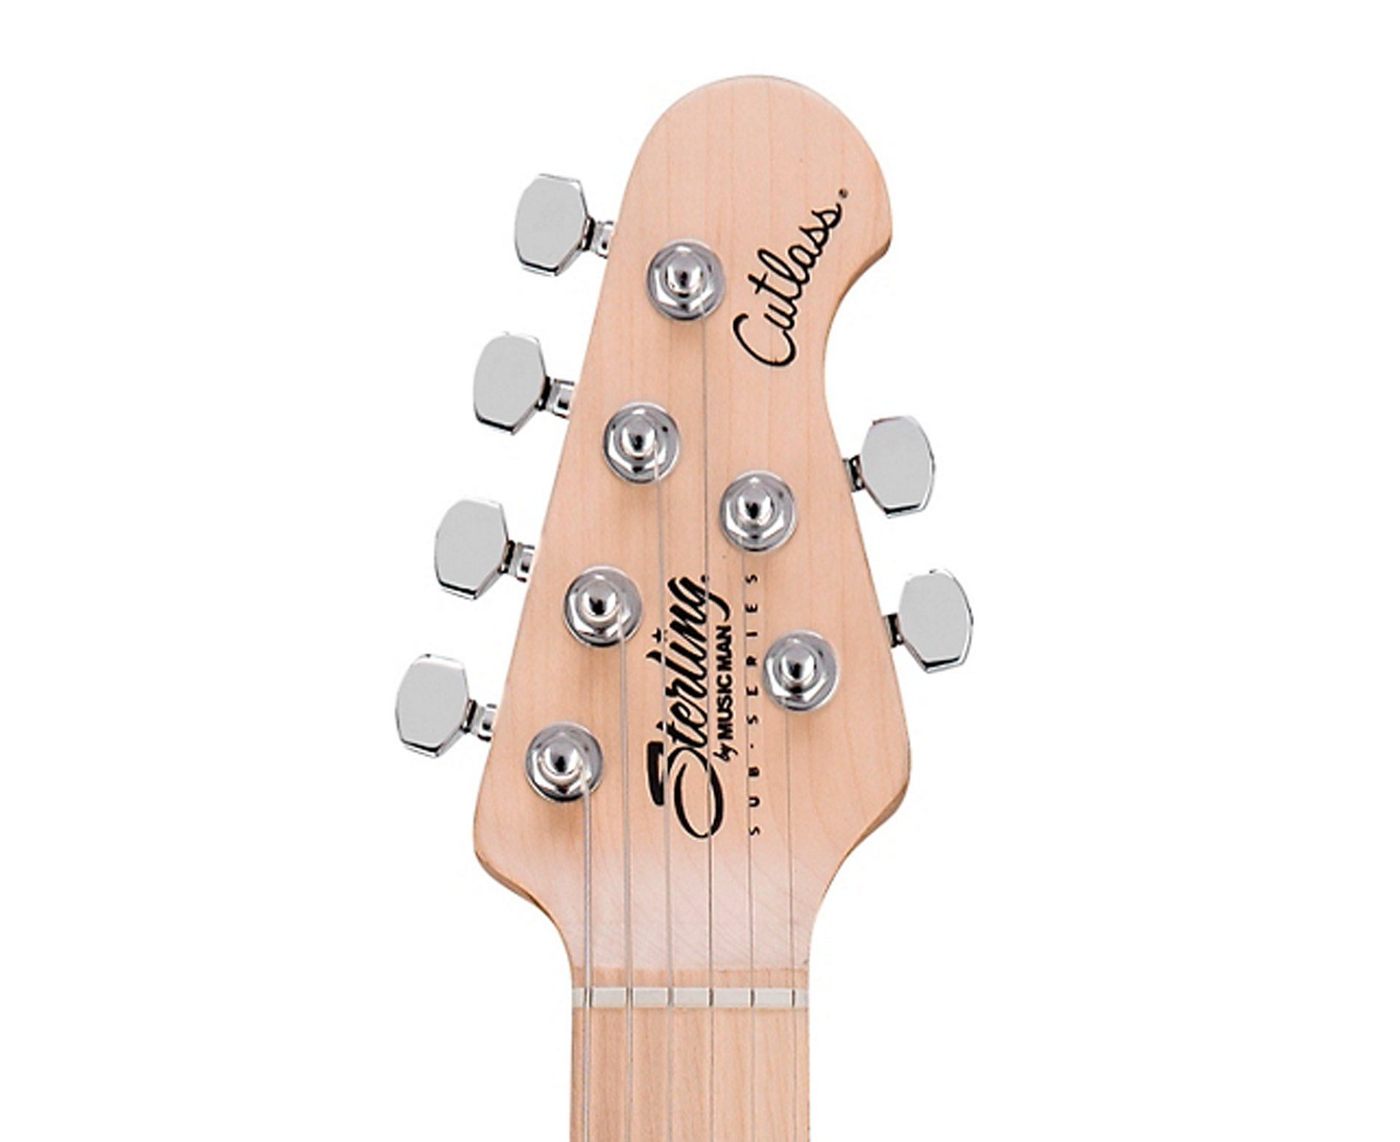 STERLING CUTLASS HSS ELECTRIC GUITAR, MAPLE FINGERBOARD CT30HSS, VINTAGE CREAM, STERLING, ELECTRIC GUITAR, sterling-electric-guitar-ct30hss-vc, ZOSO MUSIC SDN BHD